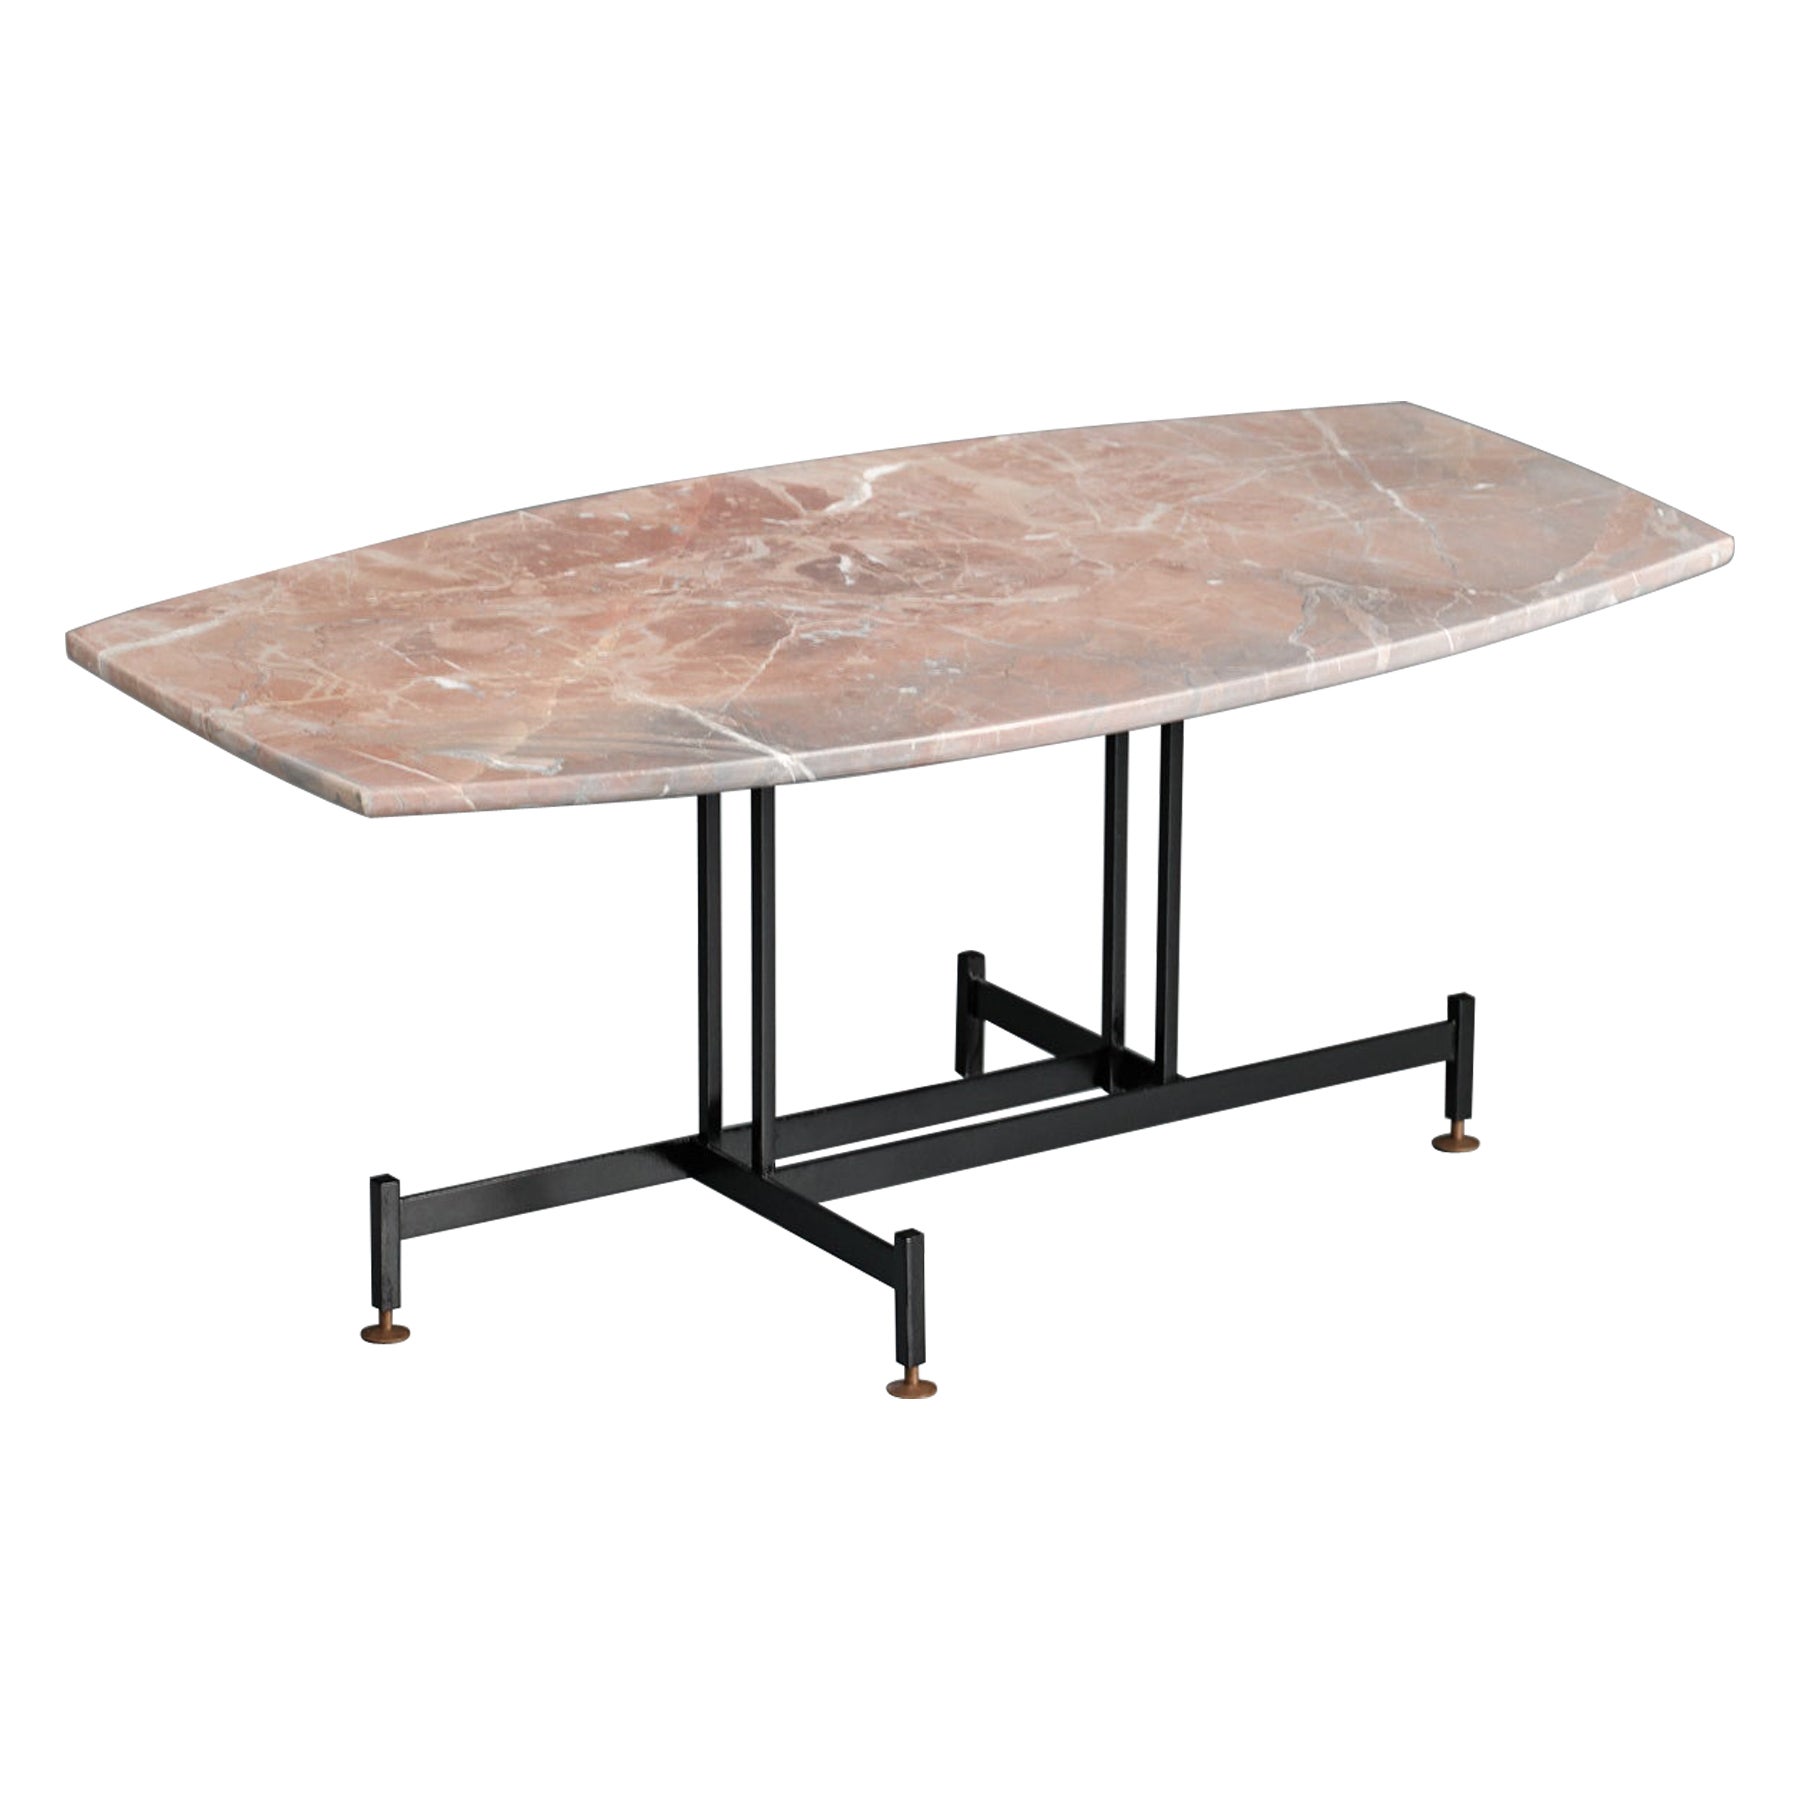 Midcentury Vintage Coffee Table with Reddish-Gray Marble Top and Geometric Iron  For Sale